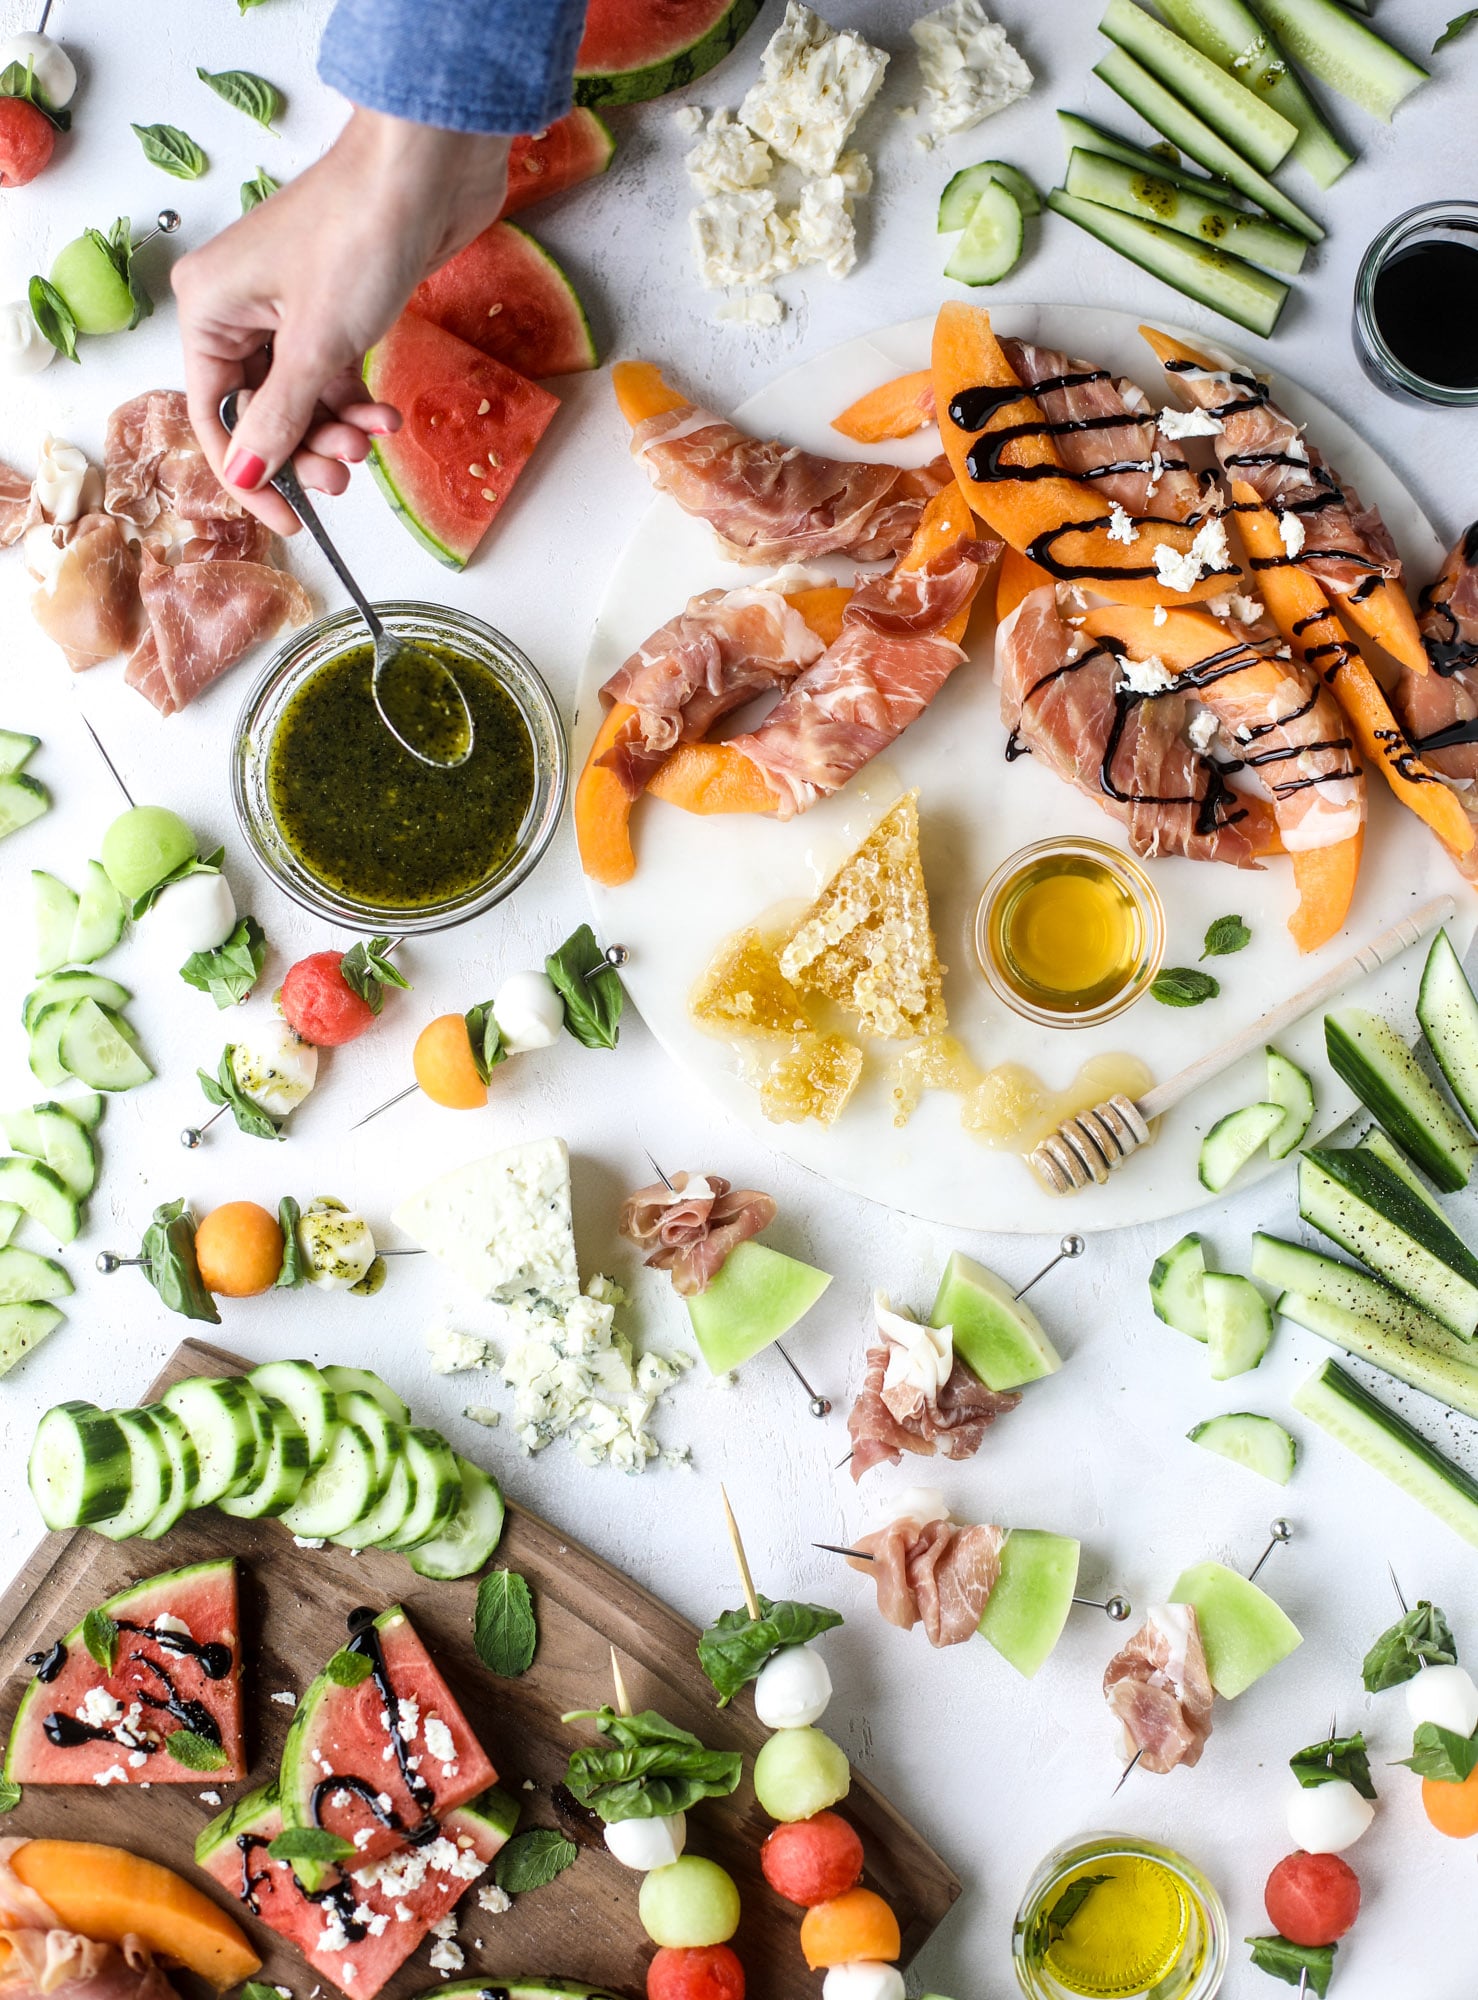 Create a melon summer snacking board with watermelon, cantaloupe, cucumber and honeydew. Drizzled with balsalmic, pesto, fresh herbs and paired with prosciutto and marinated mozzarella. I howsweeteats.com #melon #summer #snack #cheese #board #watermelon